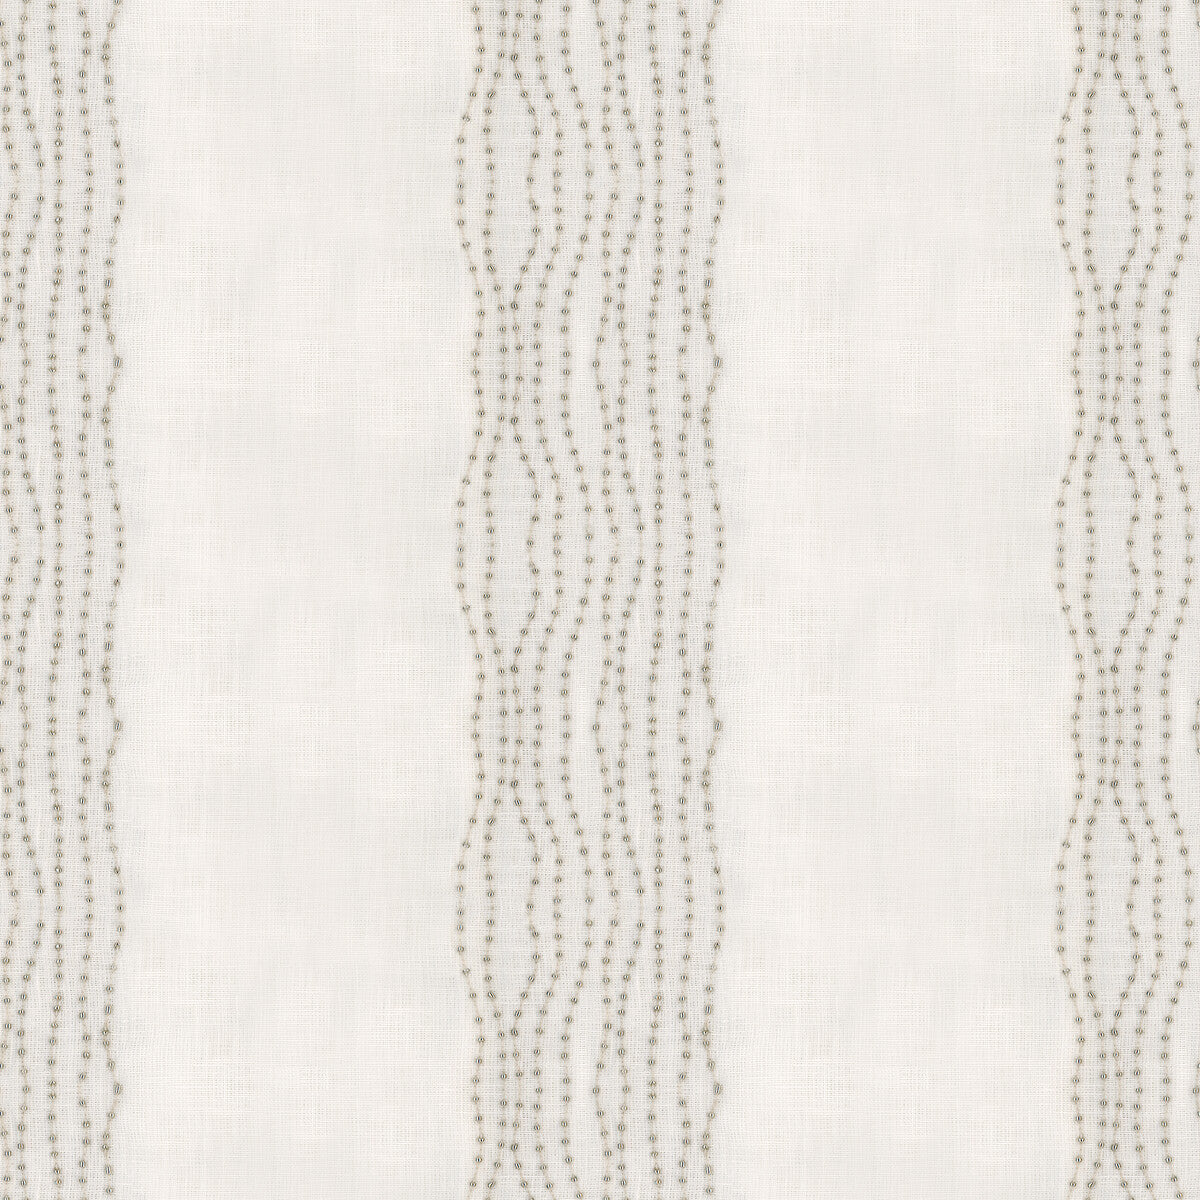 Songket fabric in lucite color - pattern 32450.101.0 - by Kravet Couture in the Calvin Klein Home collection